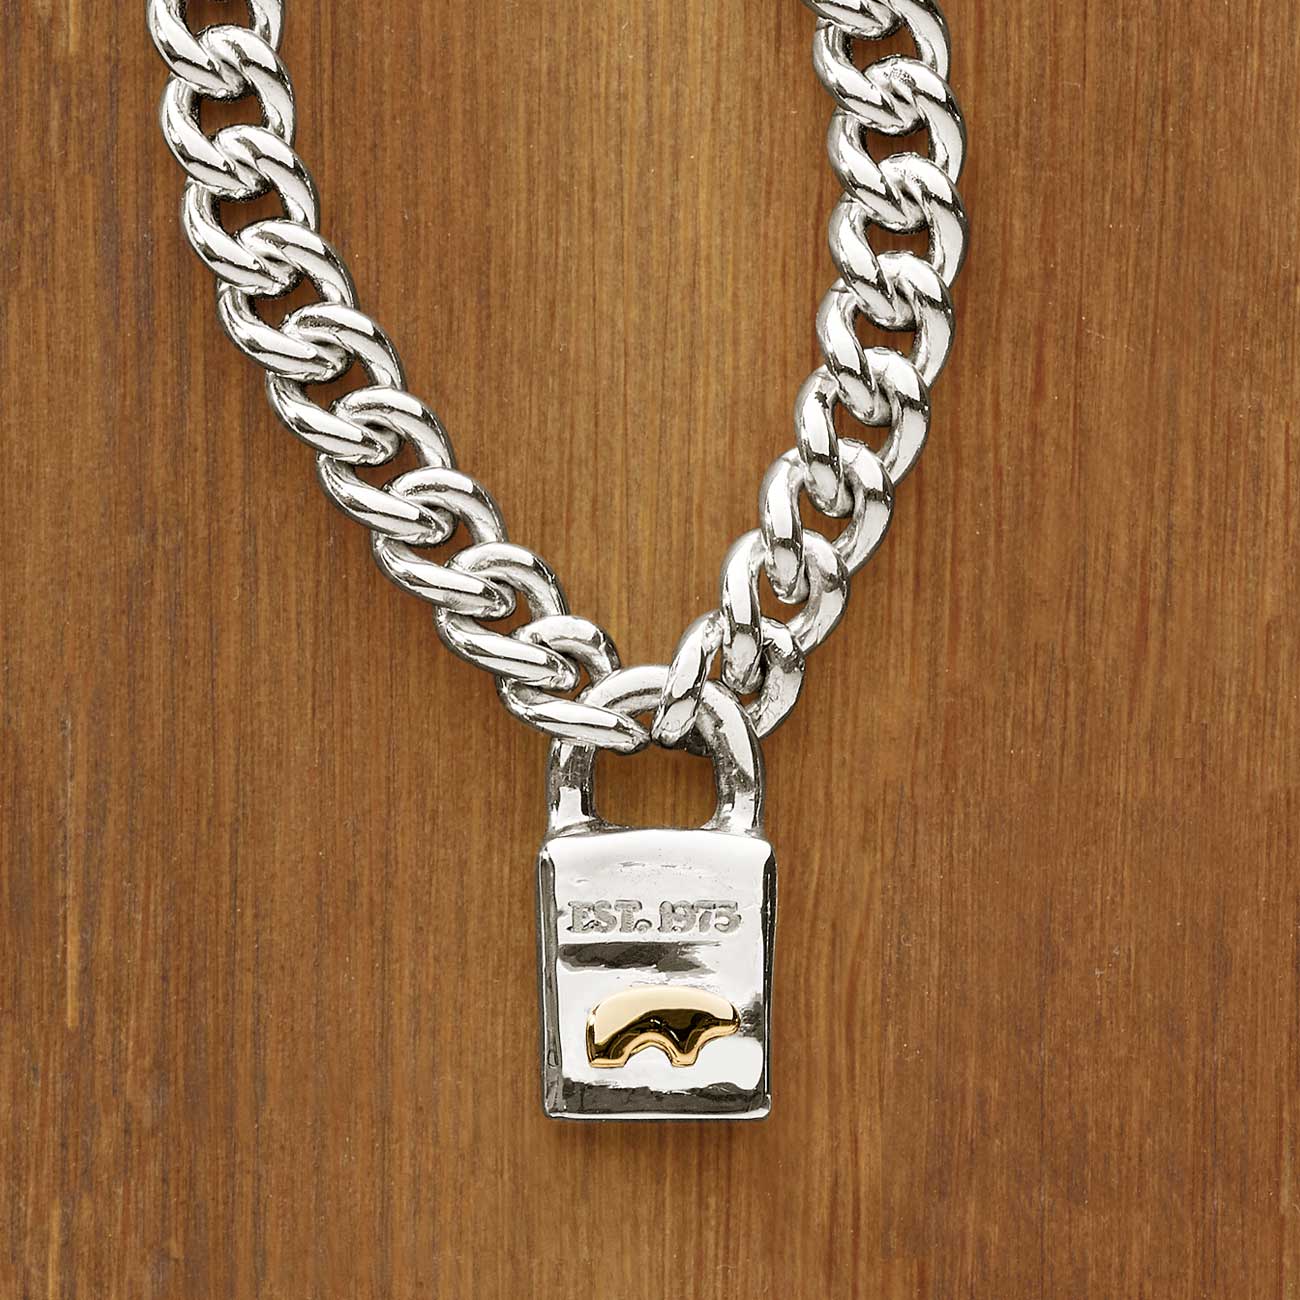 Personalized Initial V Lovers Padlock Lock Pendant Necklace Silver